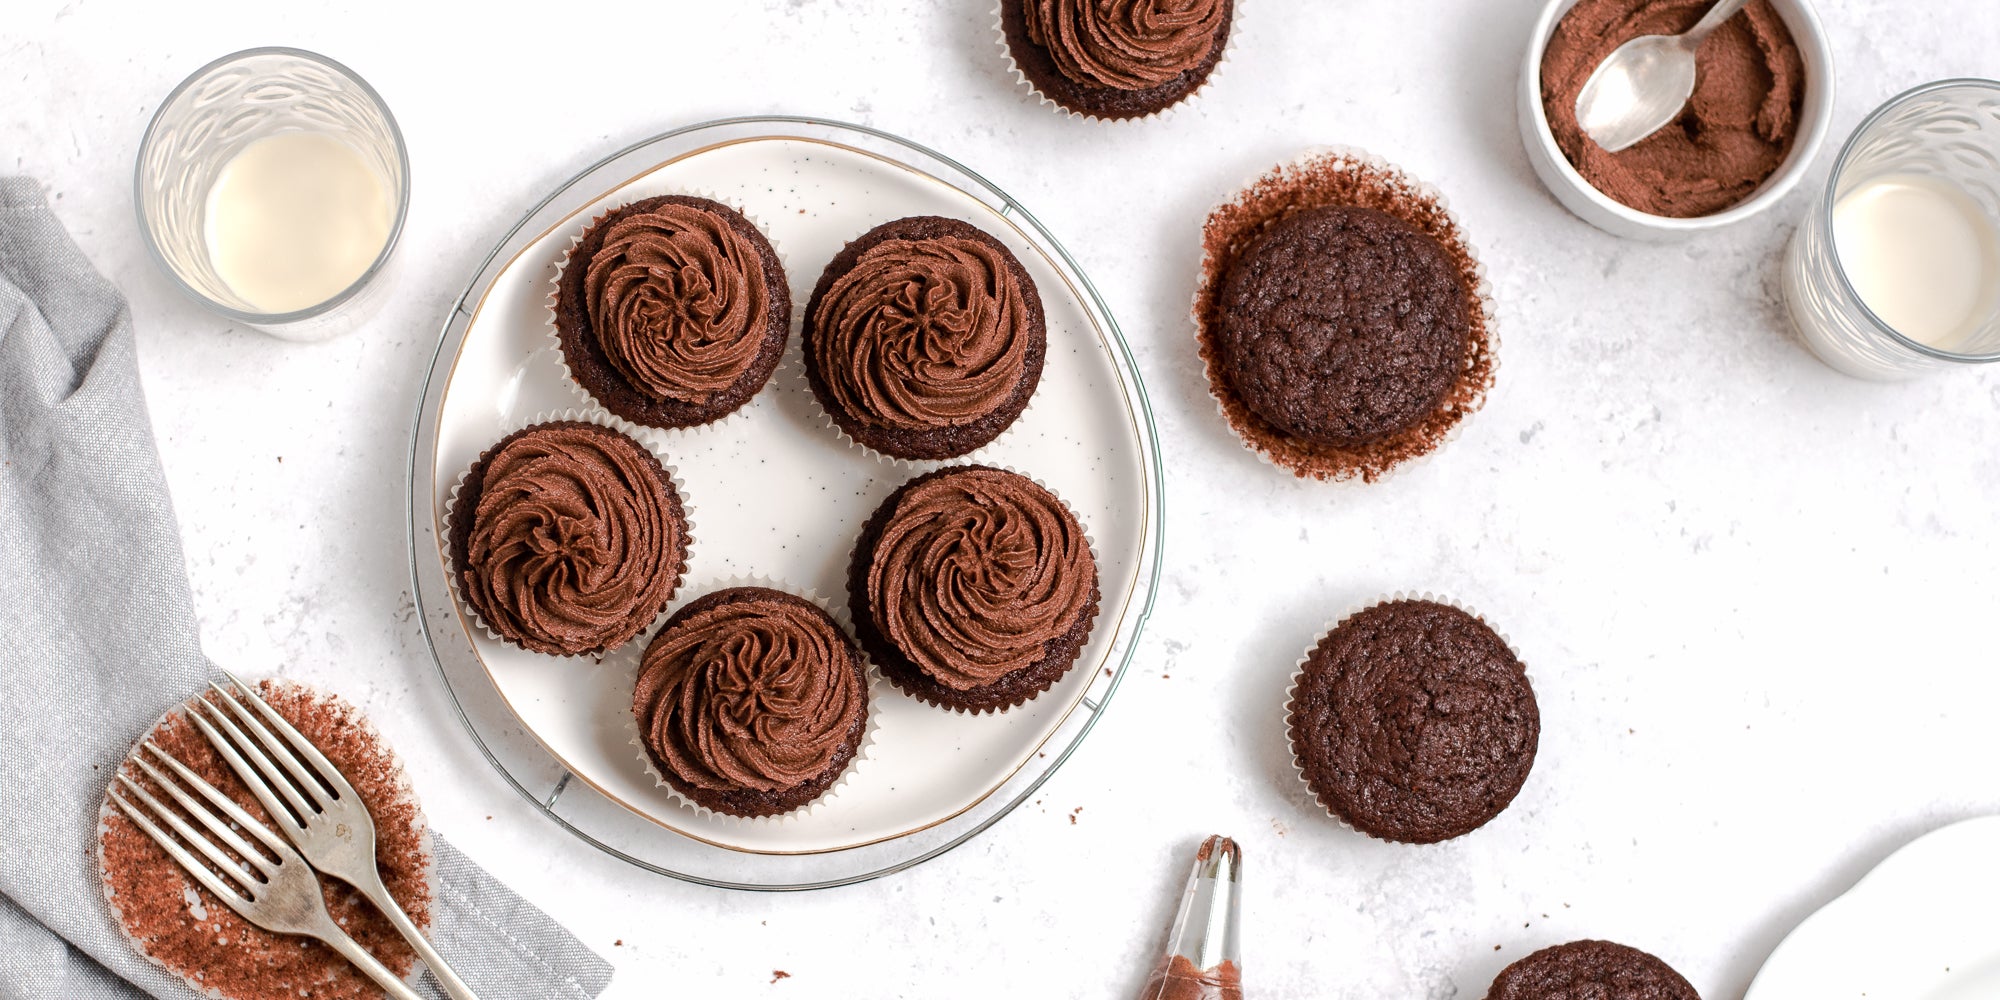 Top view of Vegan Chocolate Cupcakes piped with vegan chocolate buttercream.